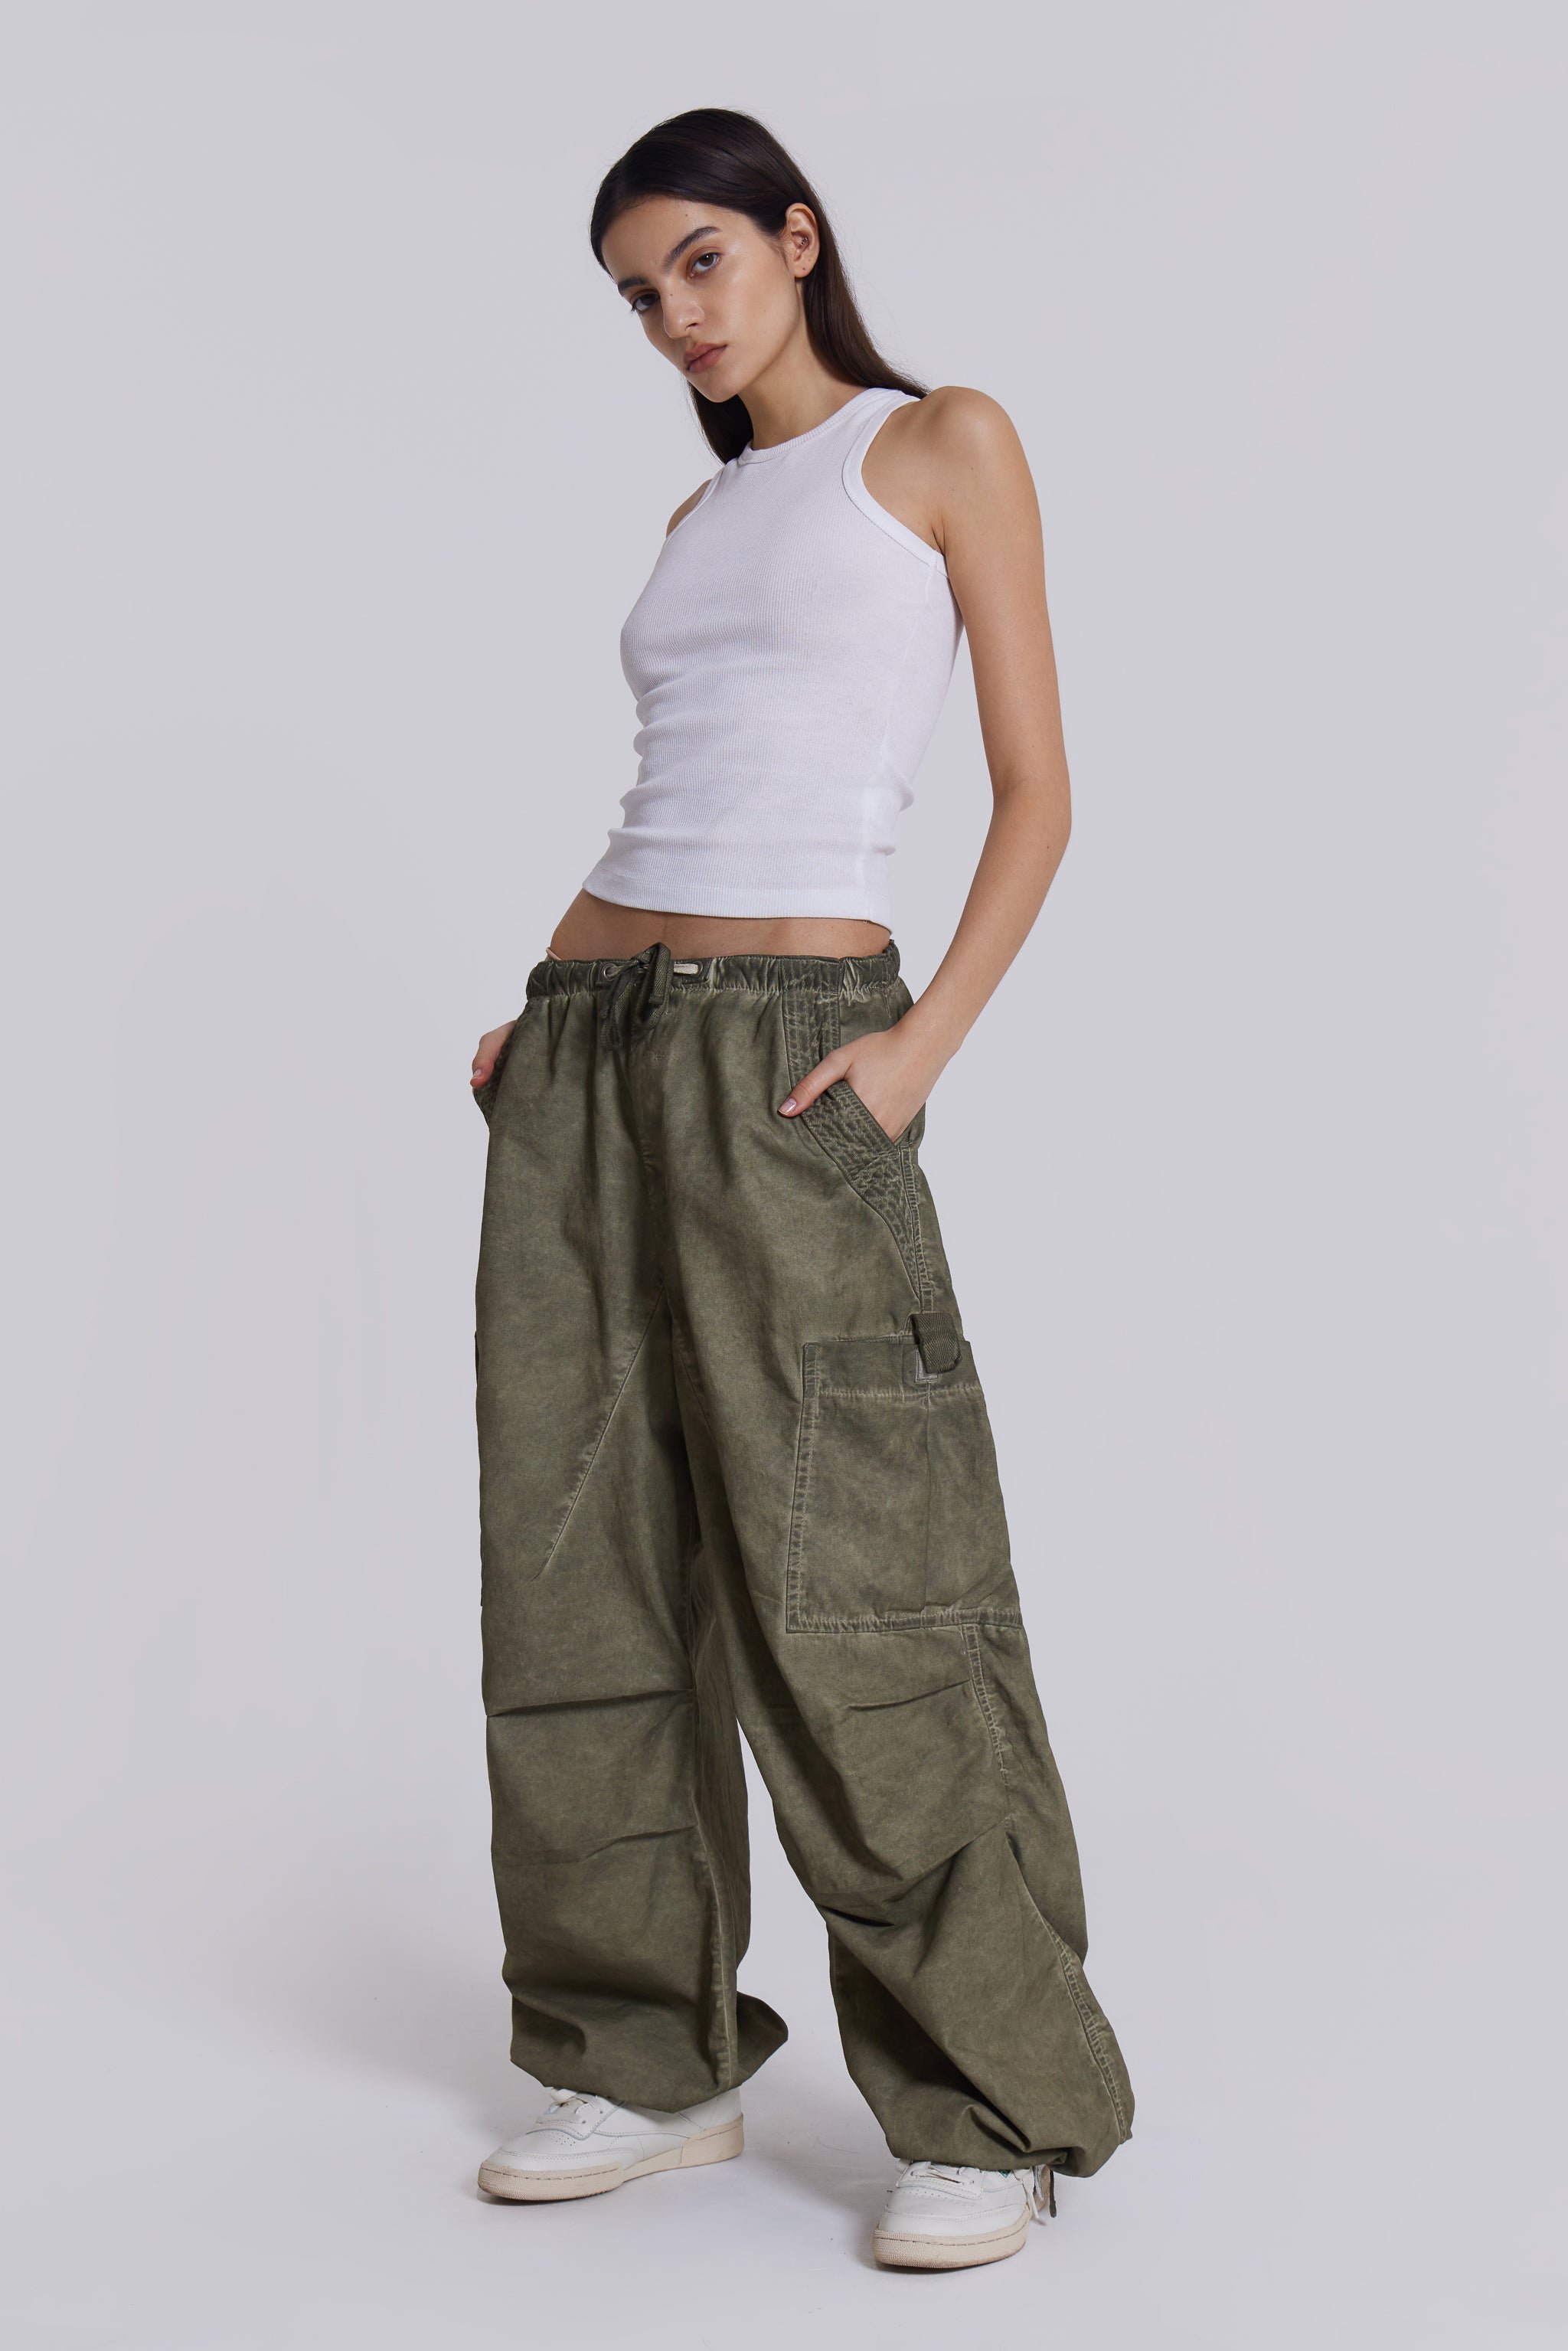 Jaded London Cargo Pants Are Affordable And On-Trend